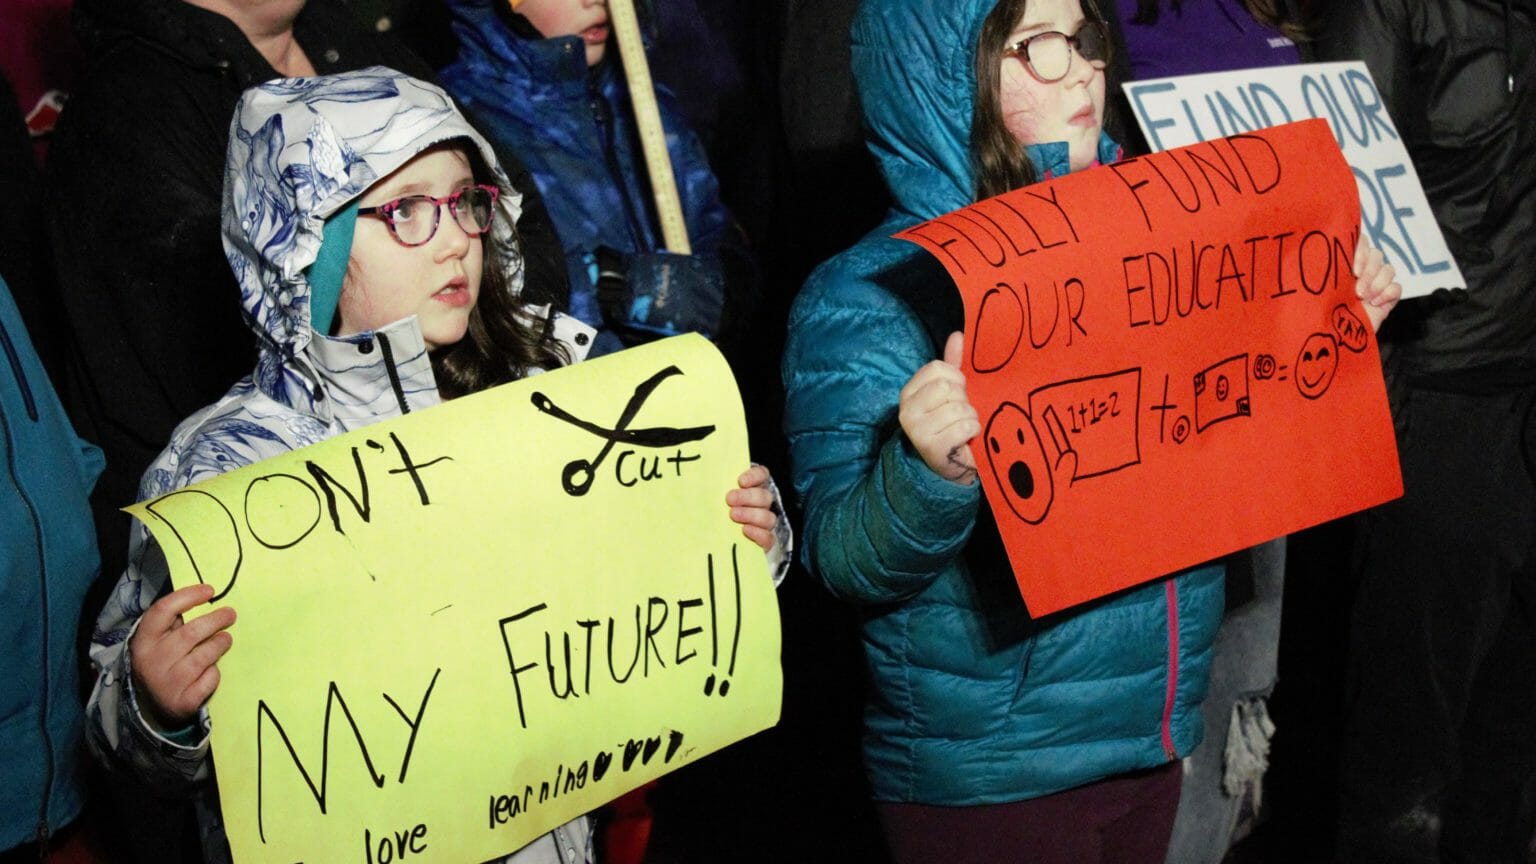 With songs and speeches, Alaskans rally in Juneau for more education funding